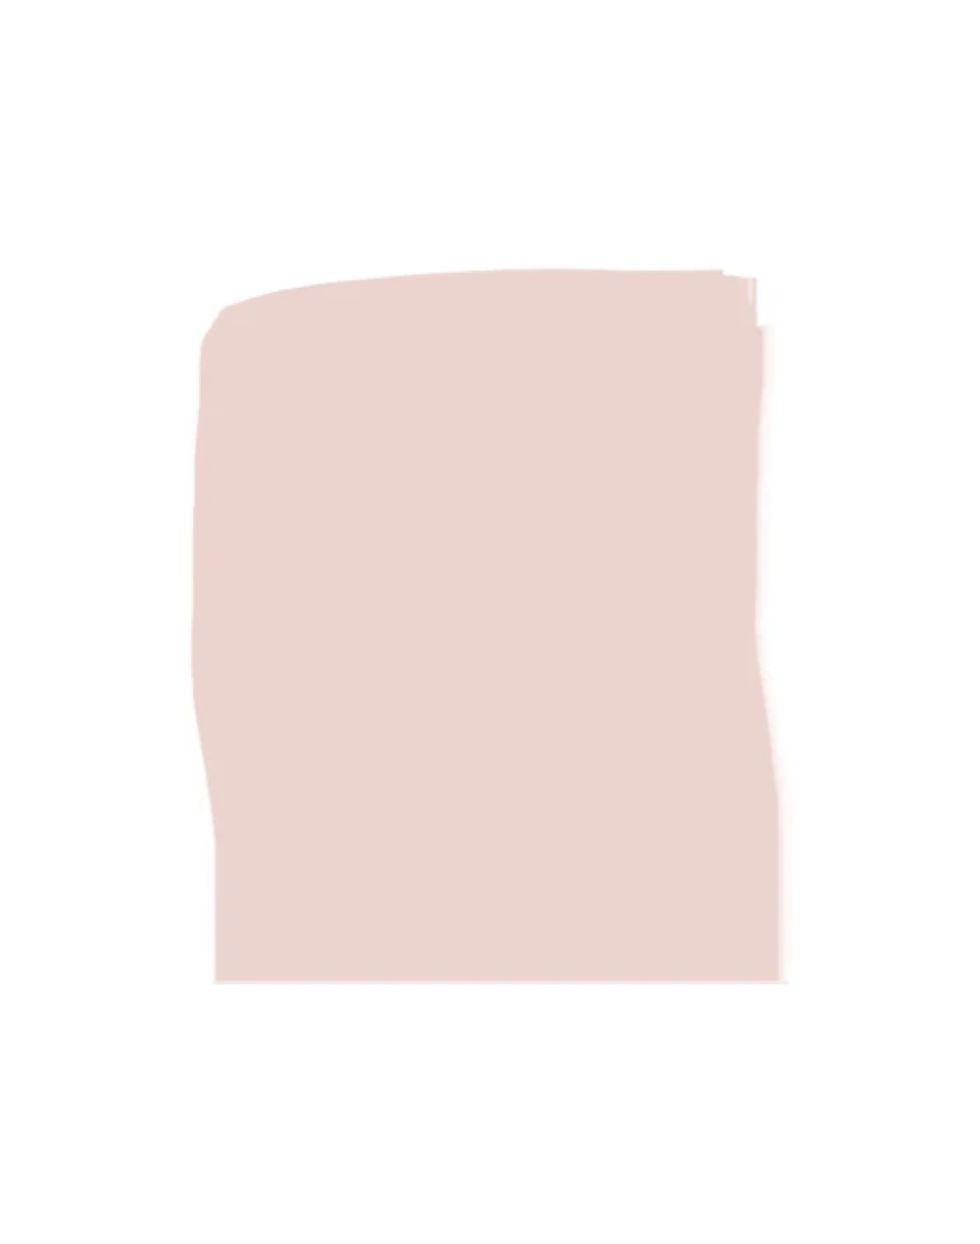 15 Most Popular Blush Pink Paint Colors in 2023  Pink paint colors, Blush pink  paint, Pink paint colors sherwin williams